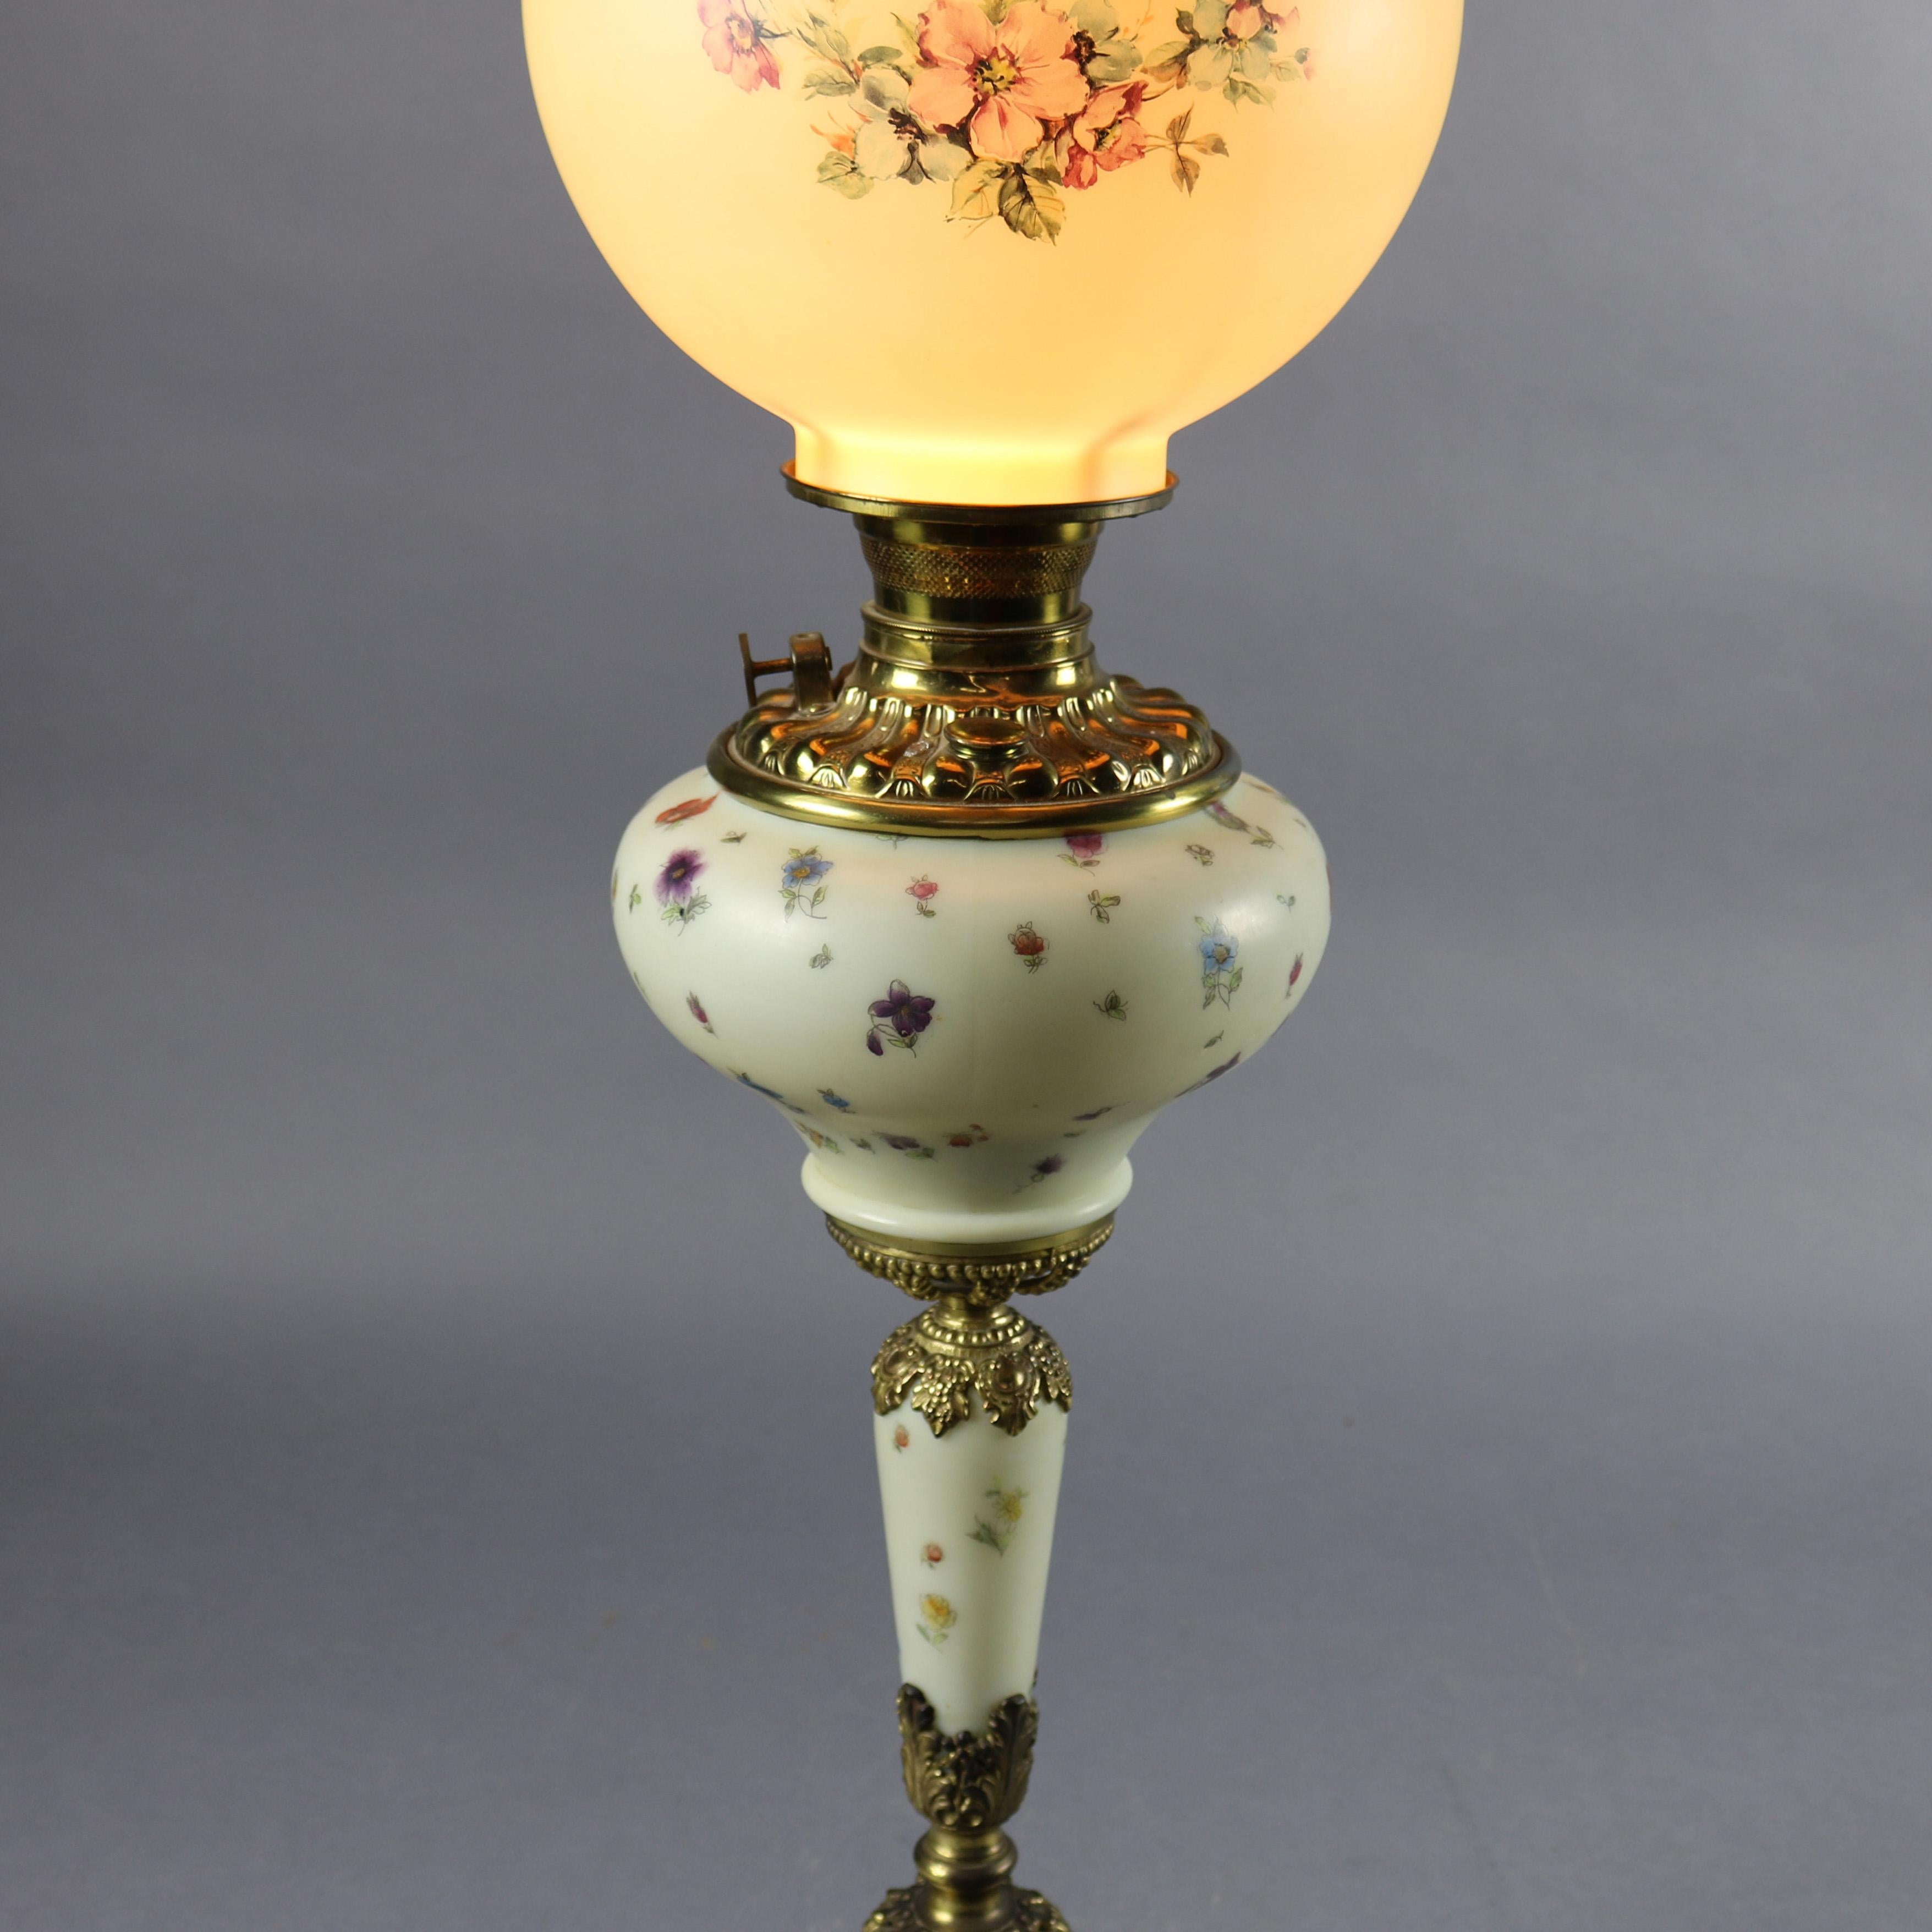 Victorian Antique Brass & Floral Hand Painted Porcelain Gone with the Wind Lamp circa 1880